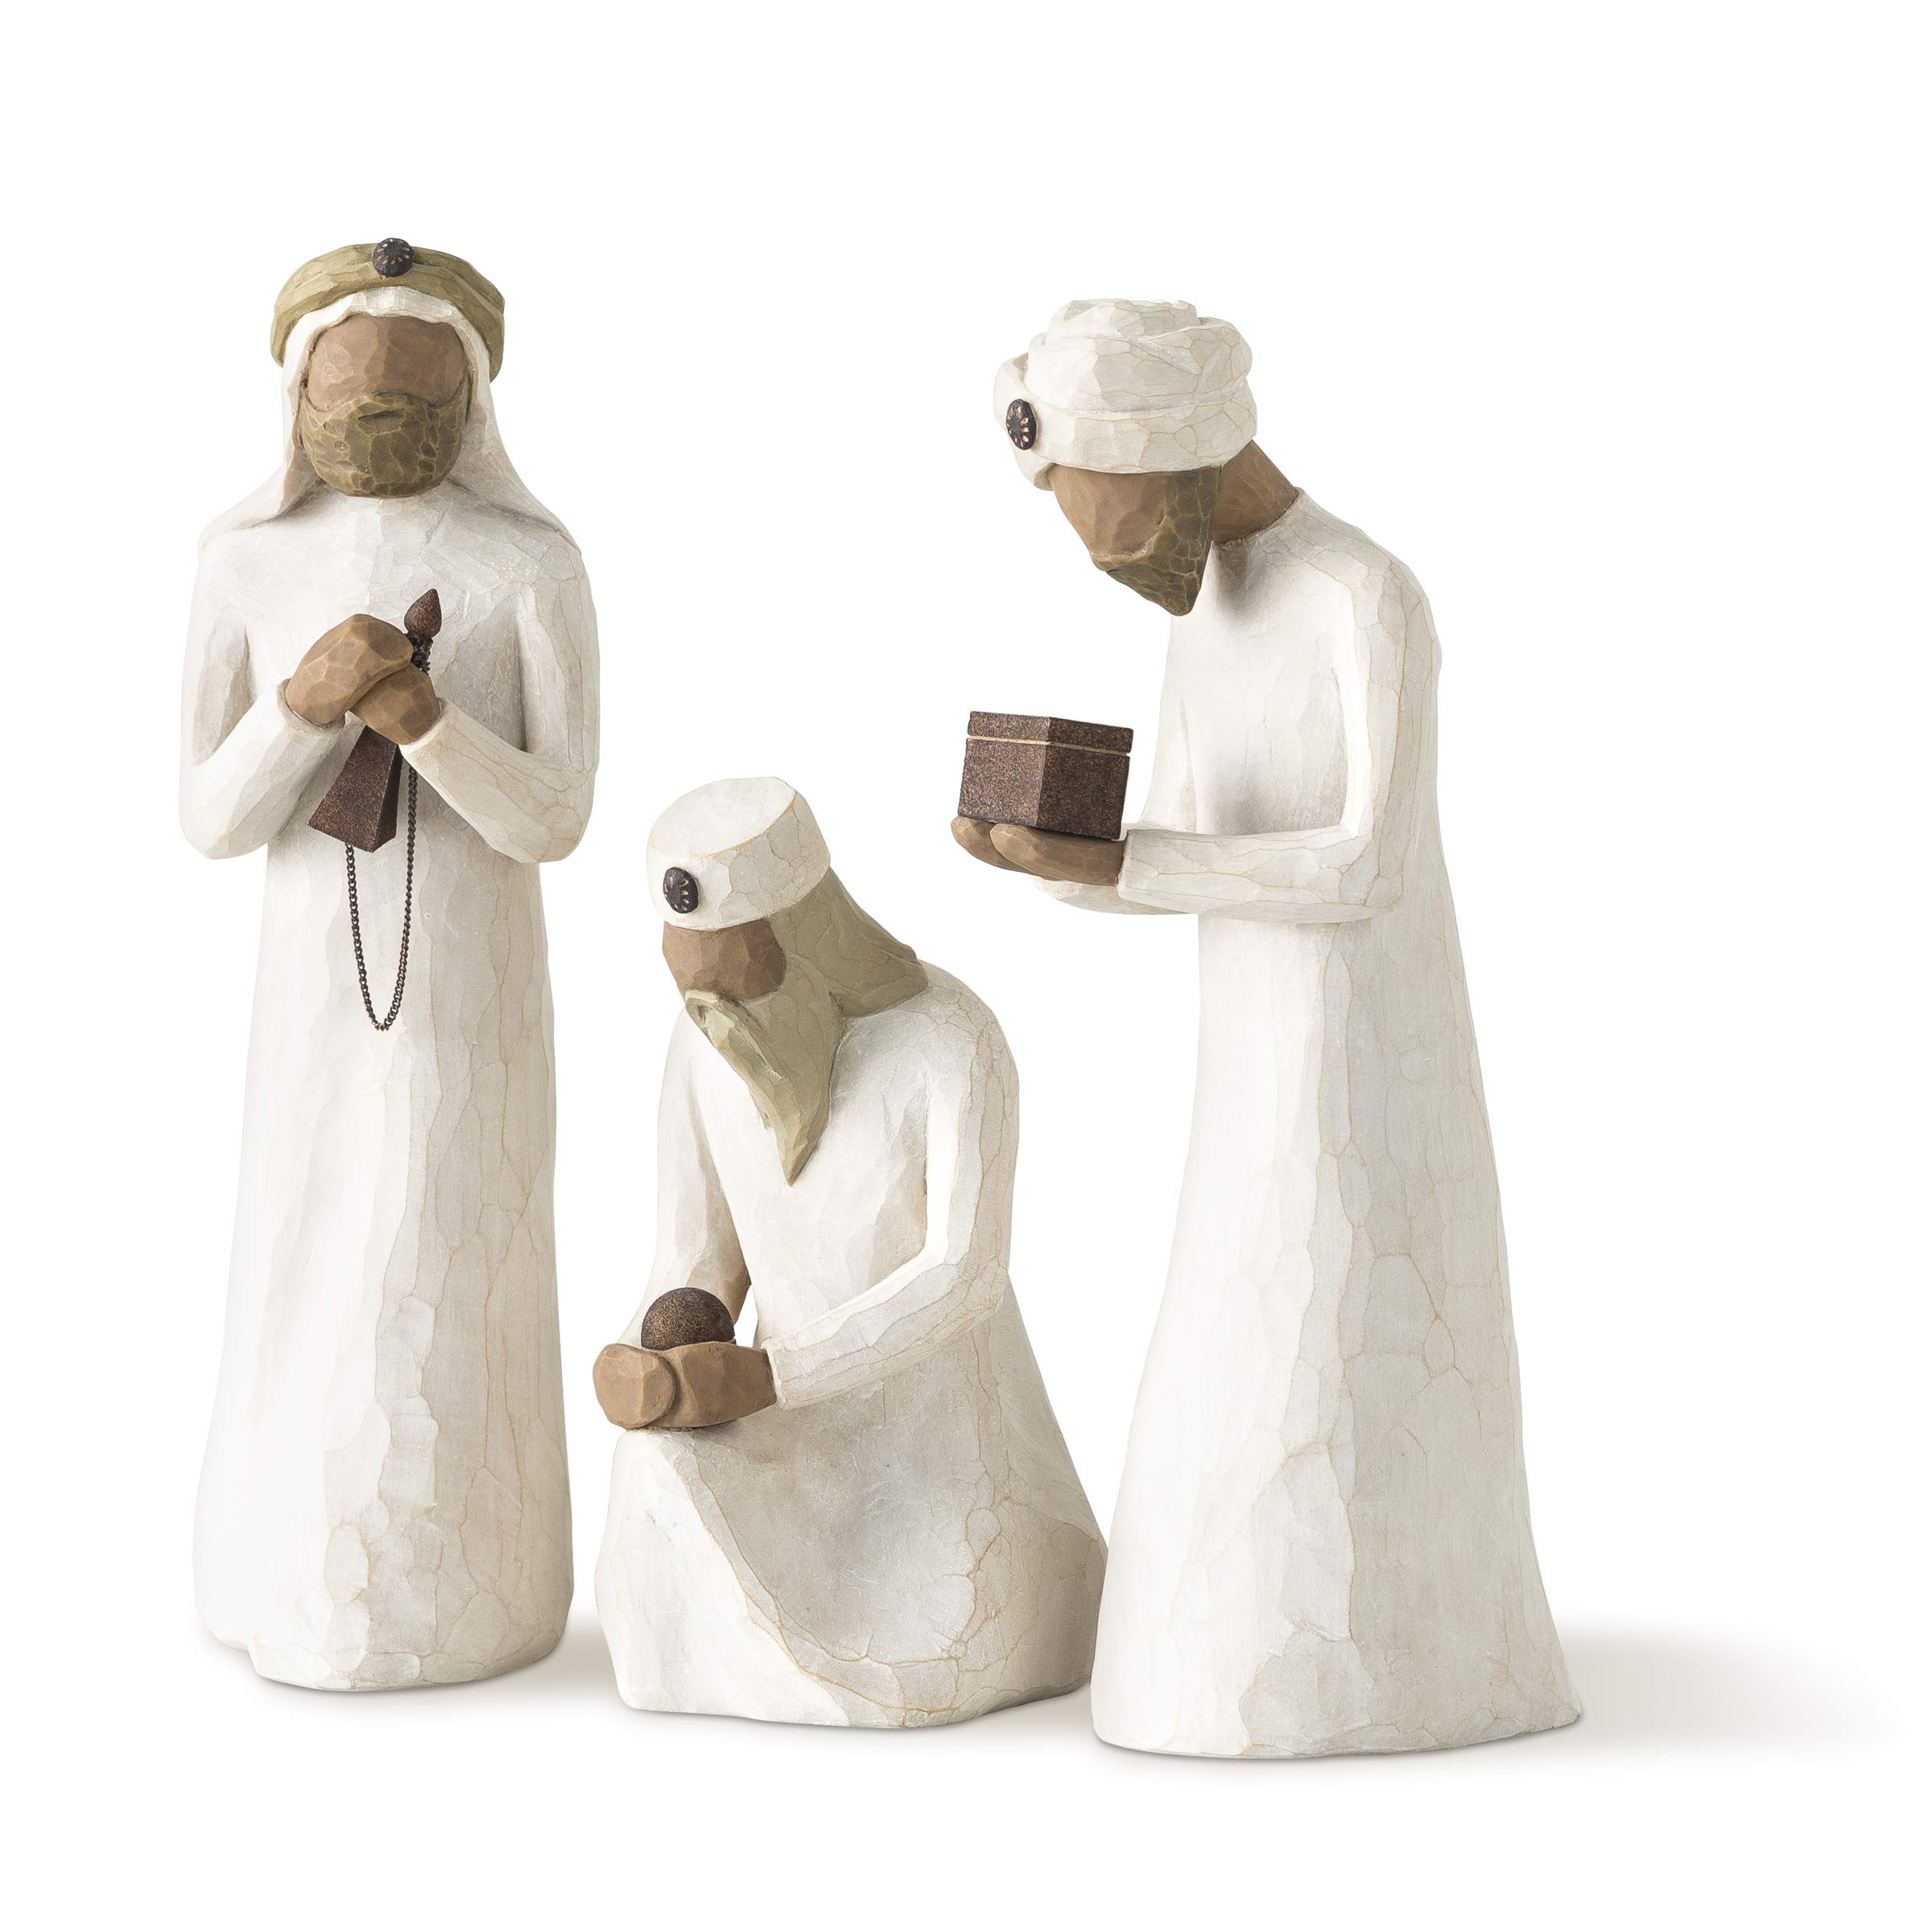 Willow Tree The Three Wisemen, Follow a Star to Find th...